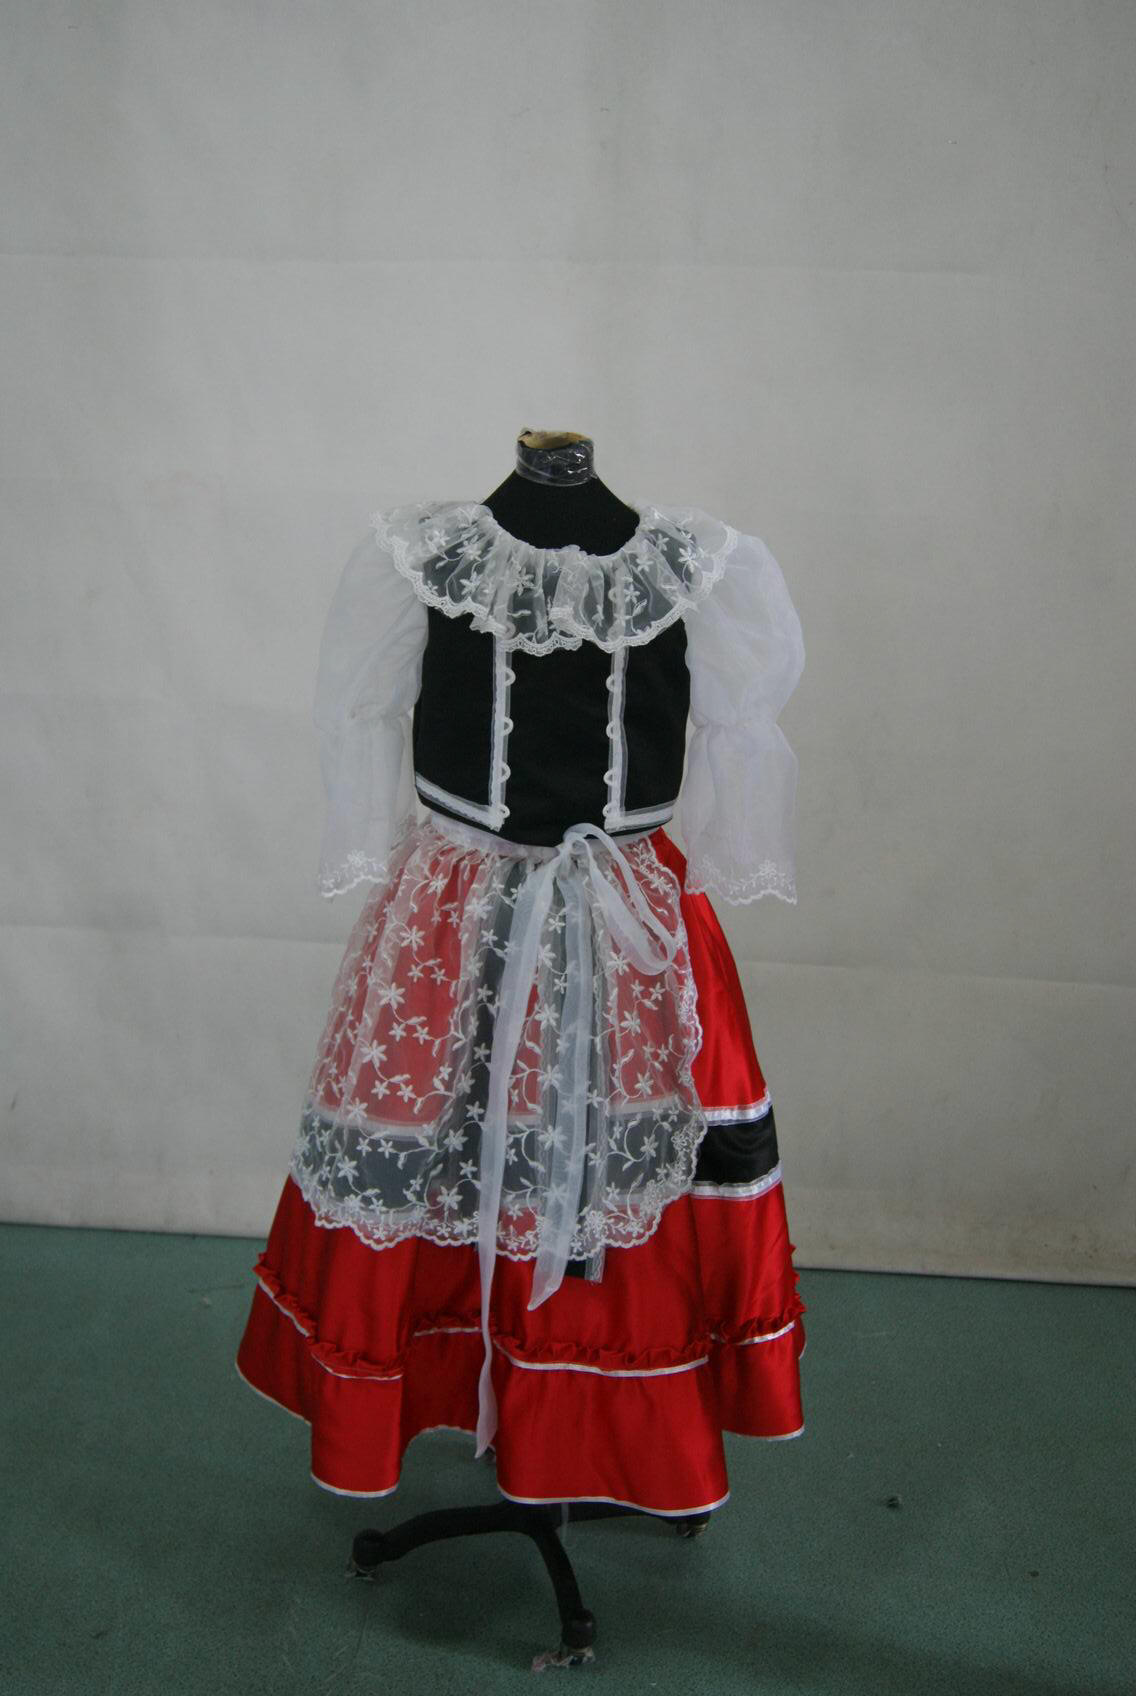 Czech outfits in red white and black